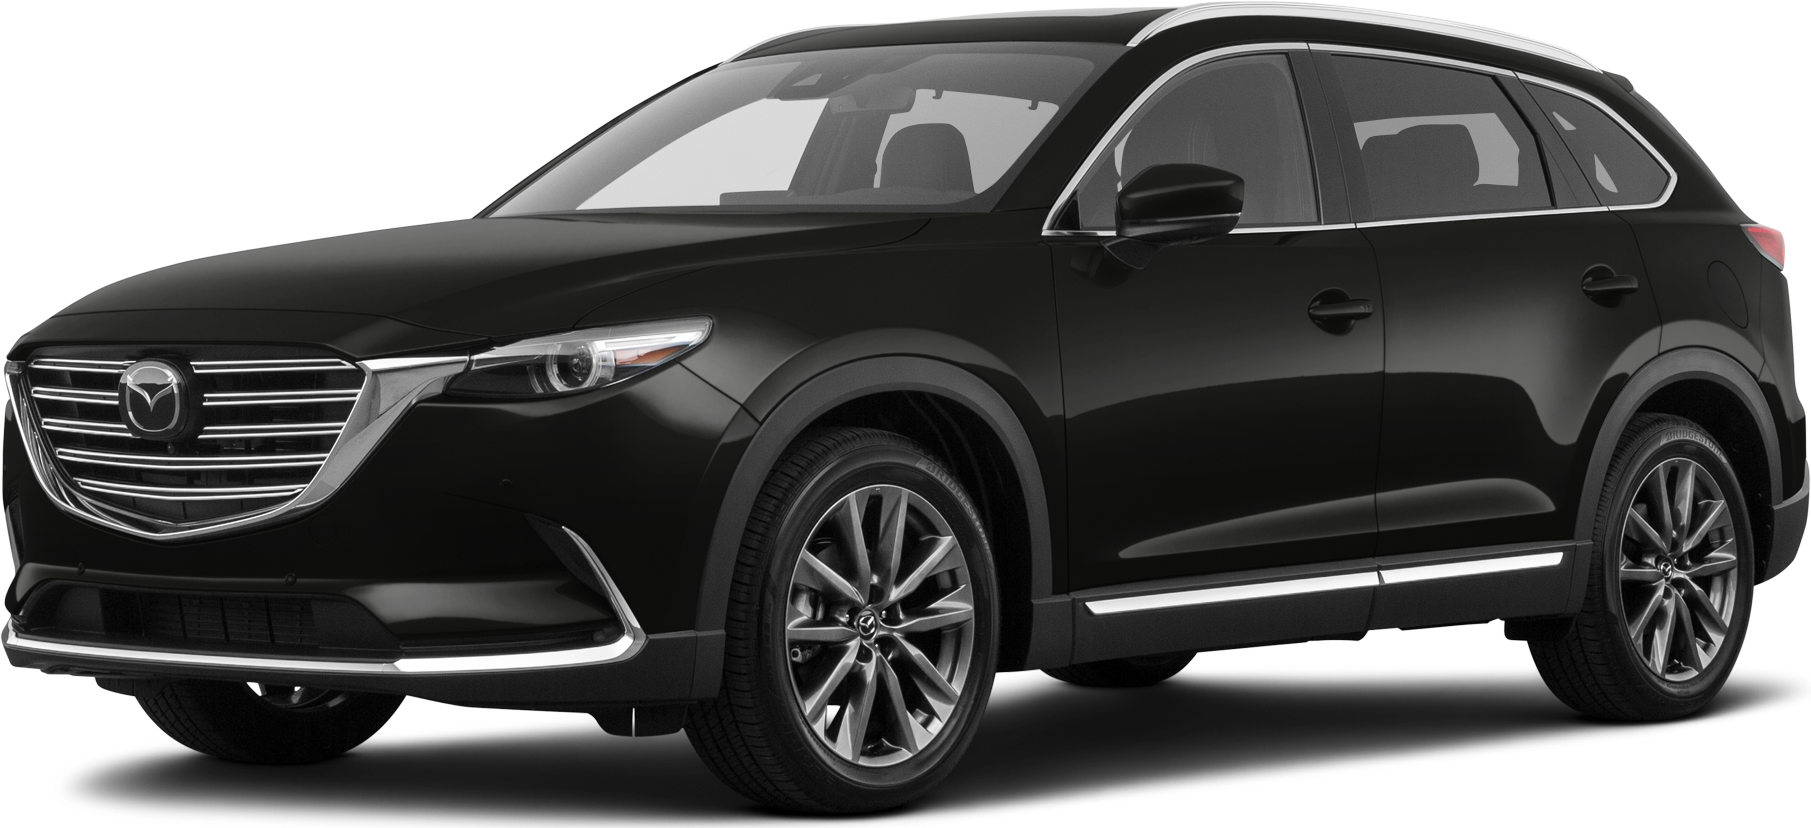 2020 Mazda Cx 9 Price Value Ratings And Reviews Kelley Blue Book